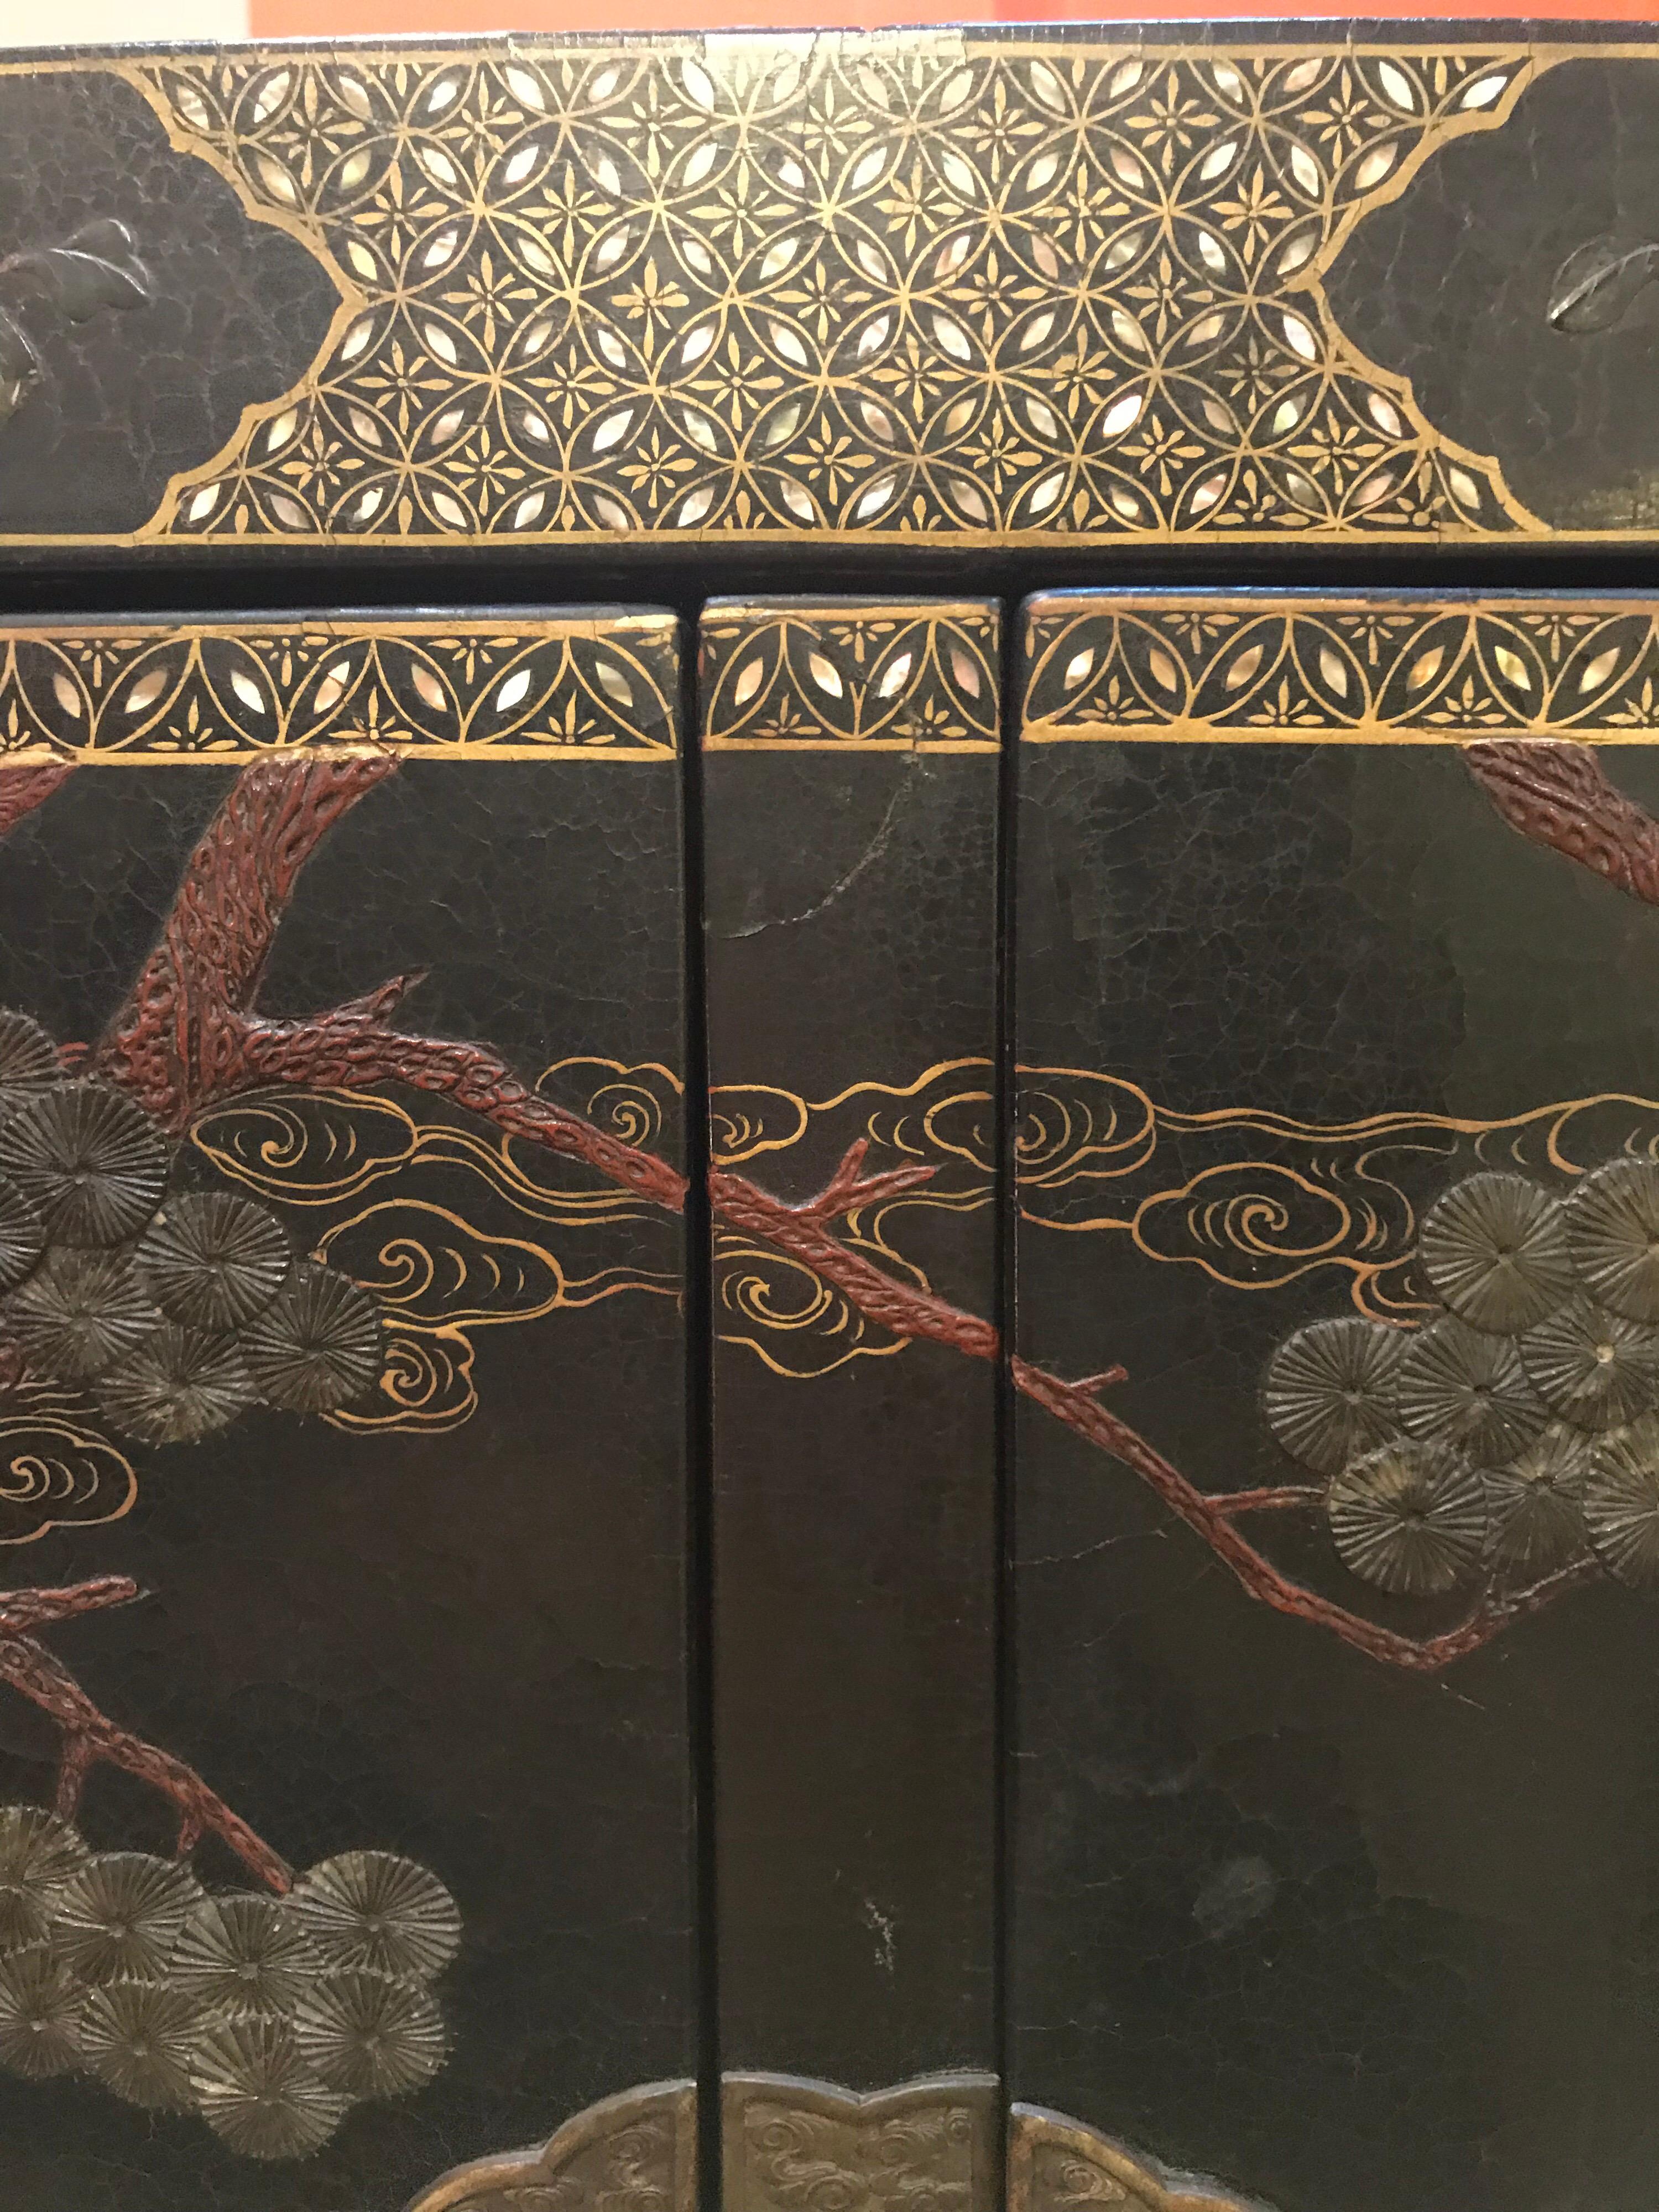 Pair of Embellished Chinese Lacquer Cabinets In Good Condition For Sale In New York, NY